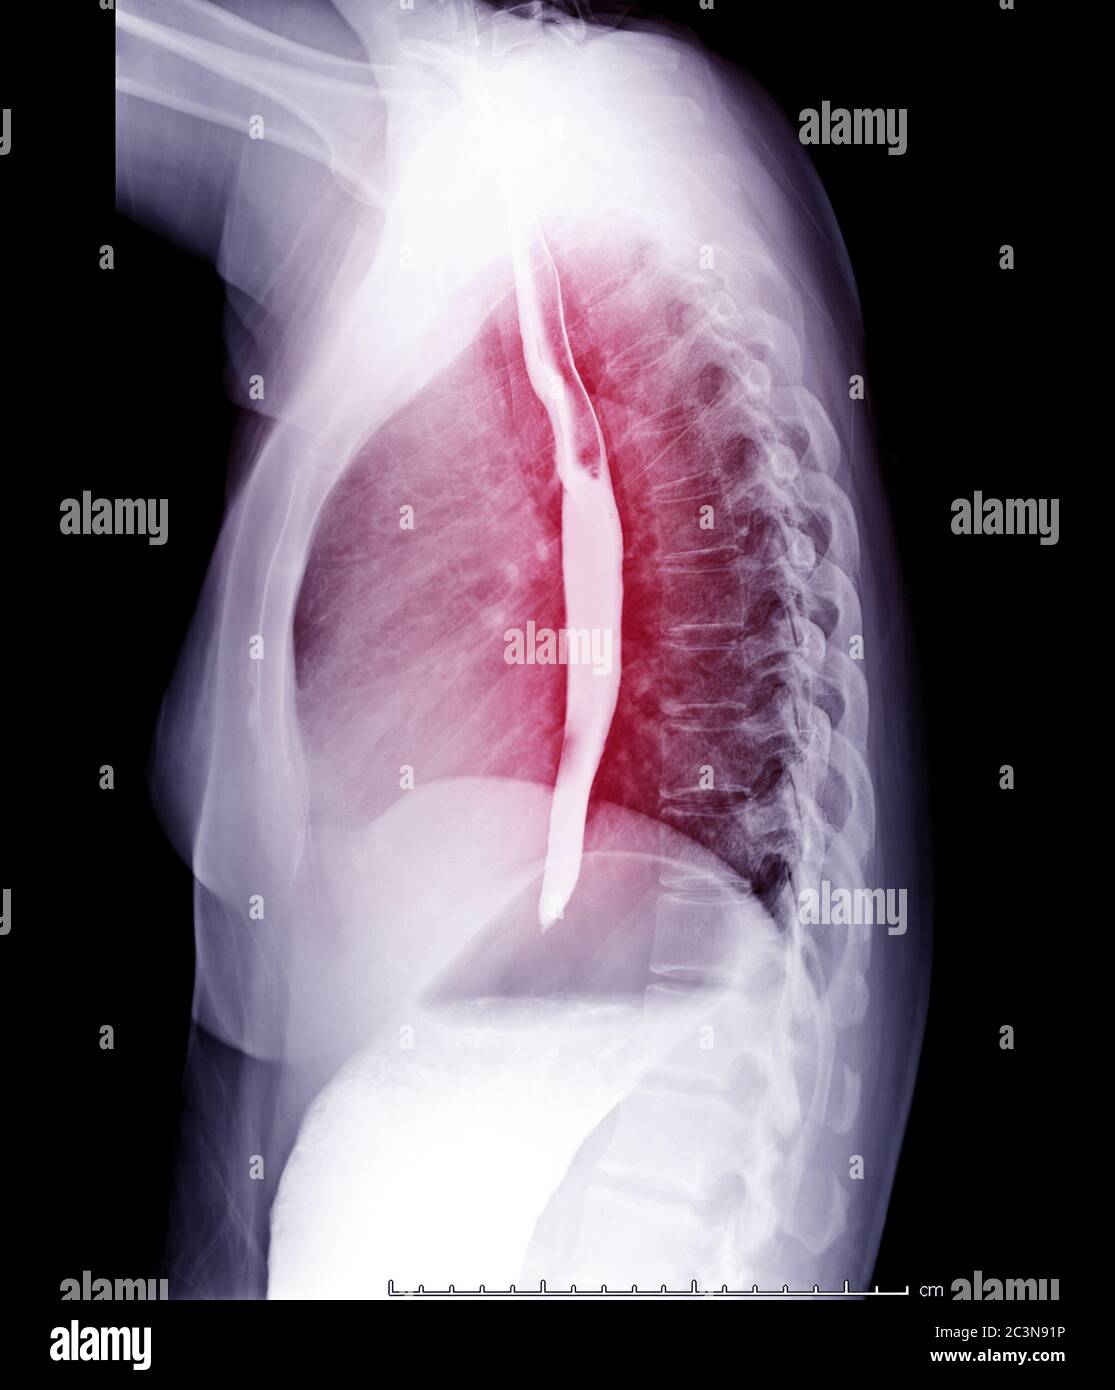 Esophagram or Barium swallow Lateral view  for diagnosis GERD or Gastroesophageal reflux disease. Stock Photo